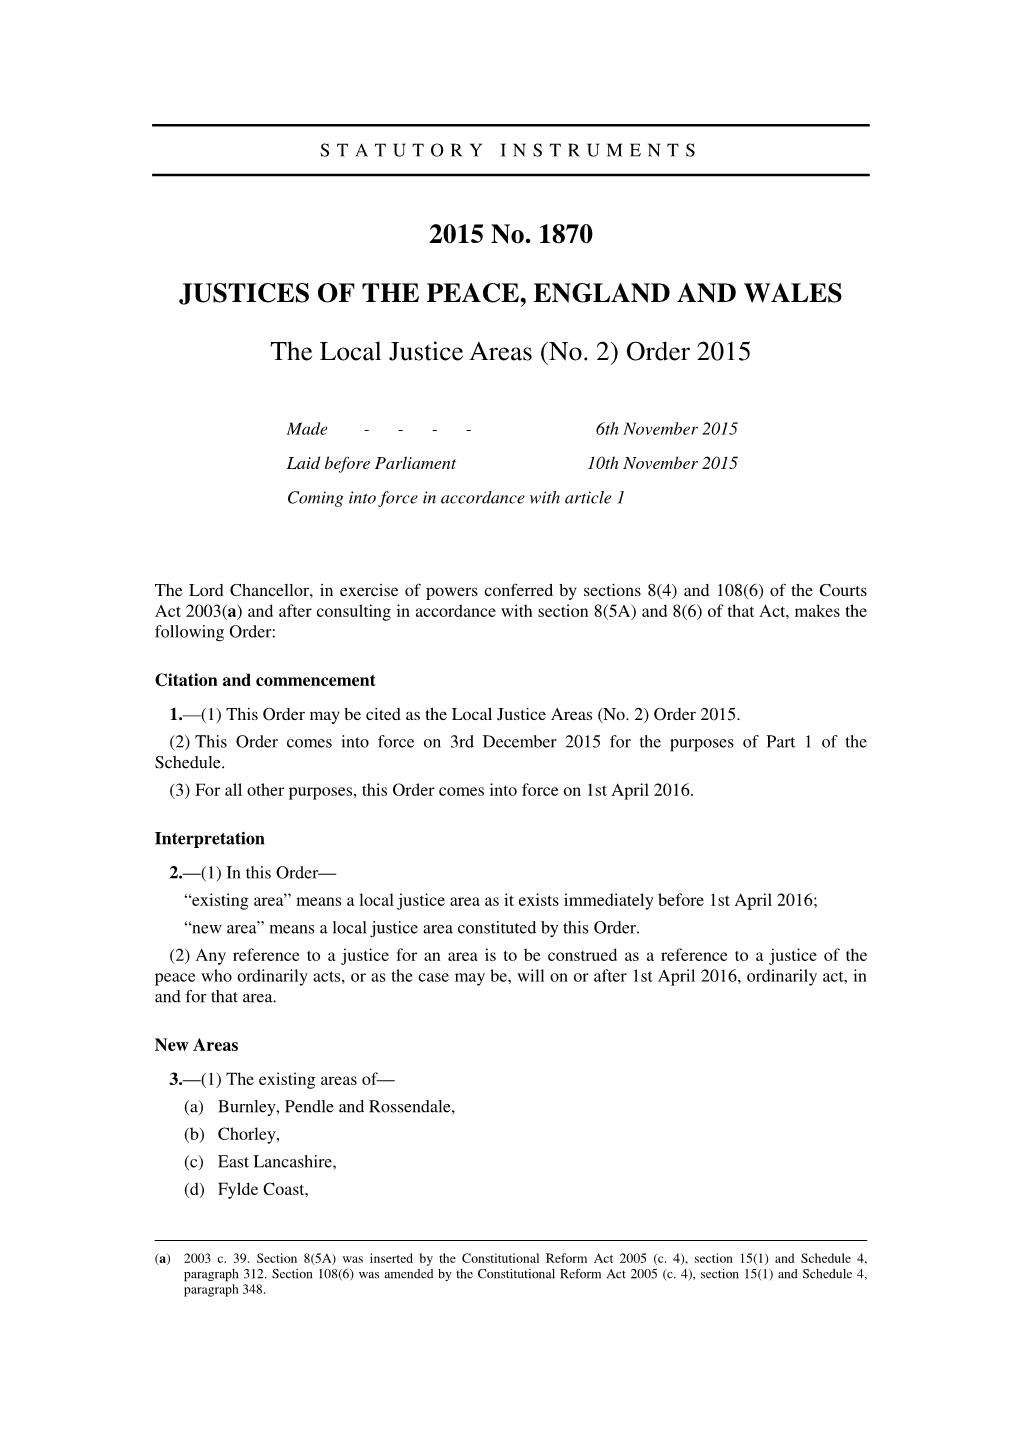 The Local Justice Areas (No. 2) Order 2015